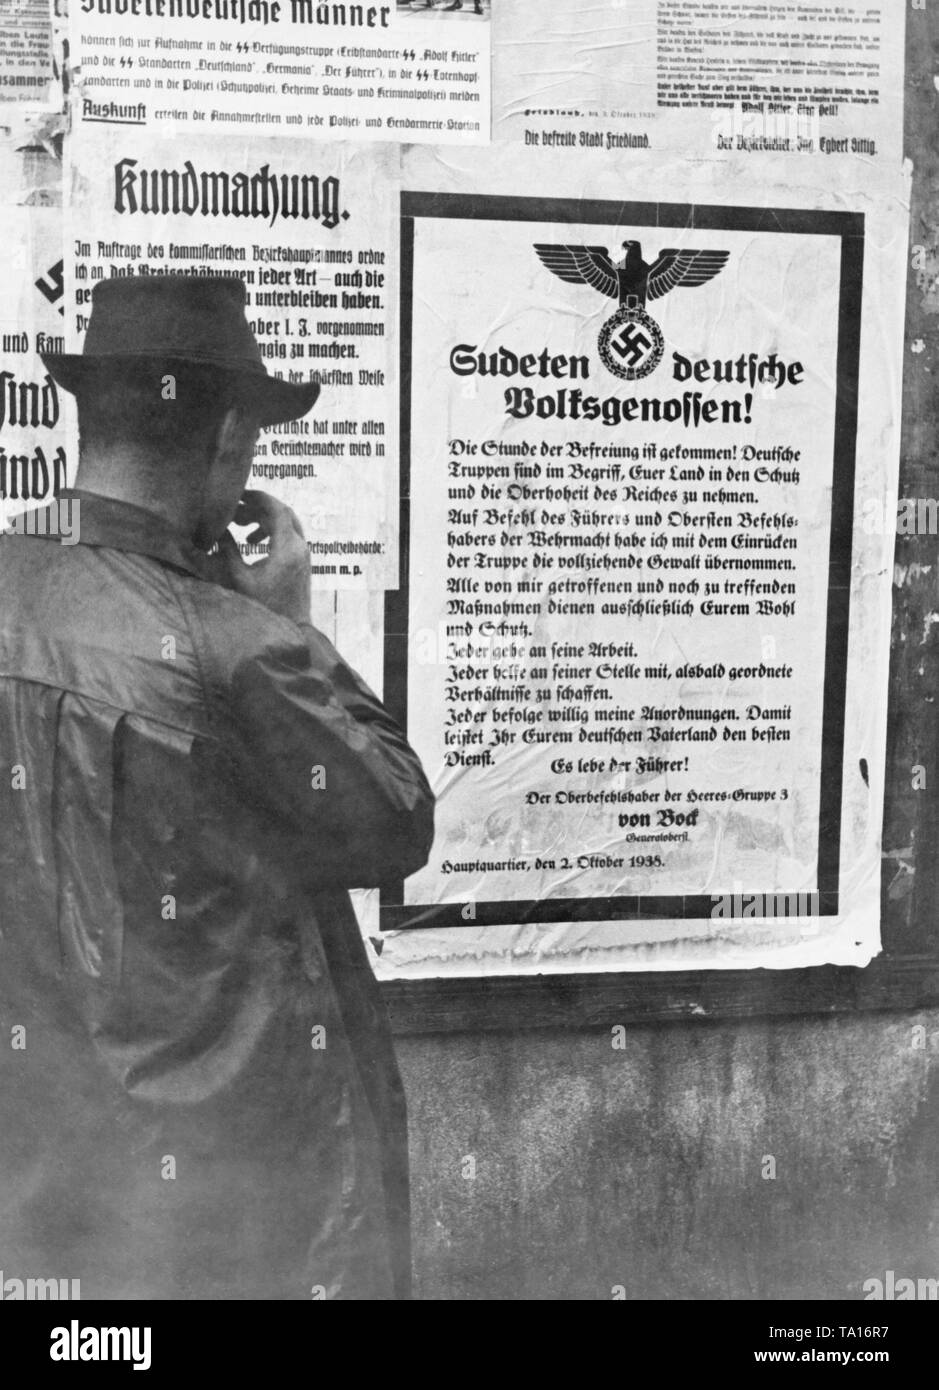 According to the Munich Agreement in October 1938, Czechoslovakia had to cede the Sudeten German territories to the German Reich. A man reads an announcement by Adolf Hitler to Sudeten German people. Stock Photo